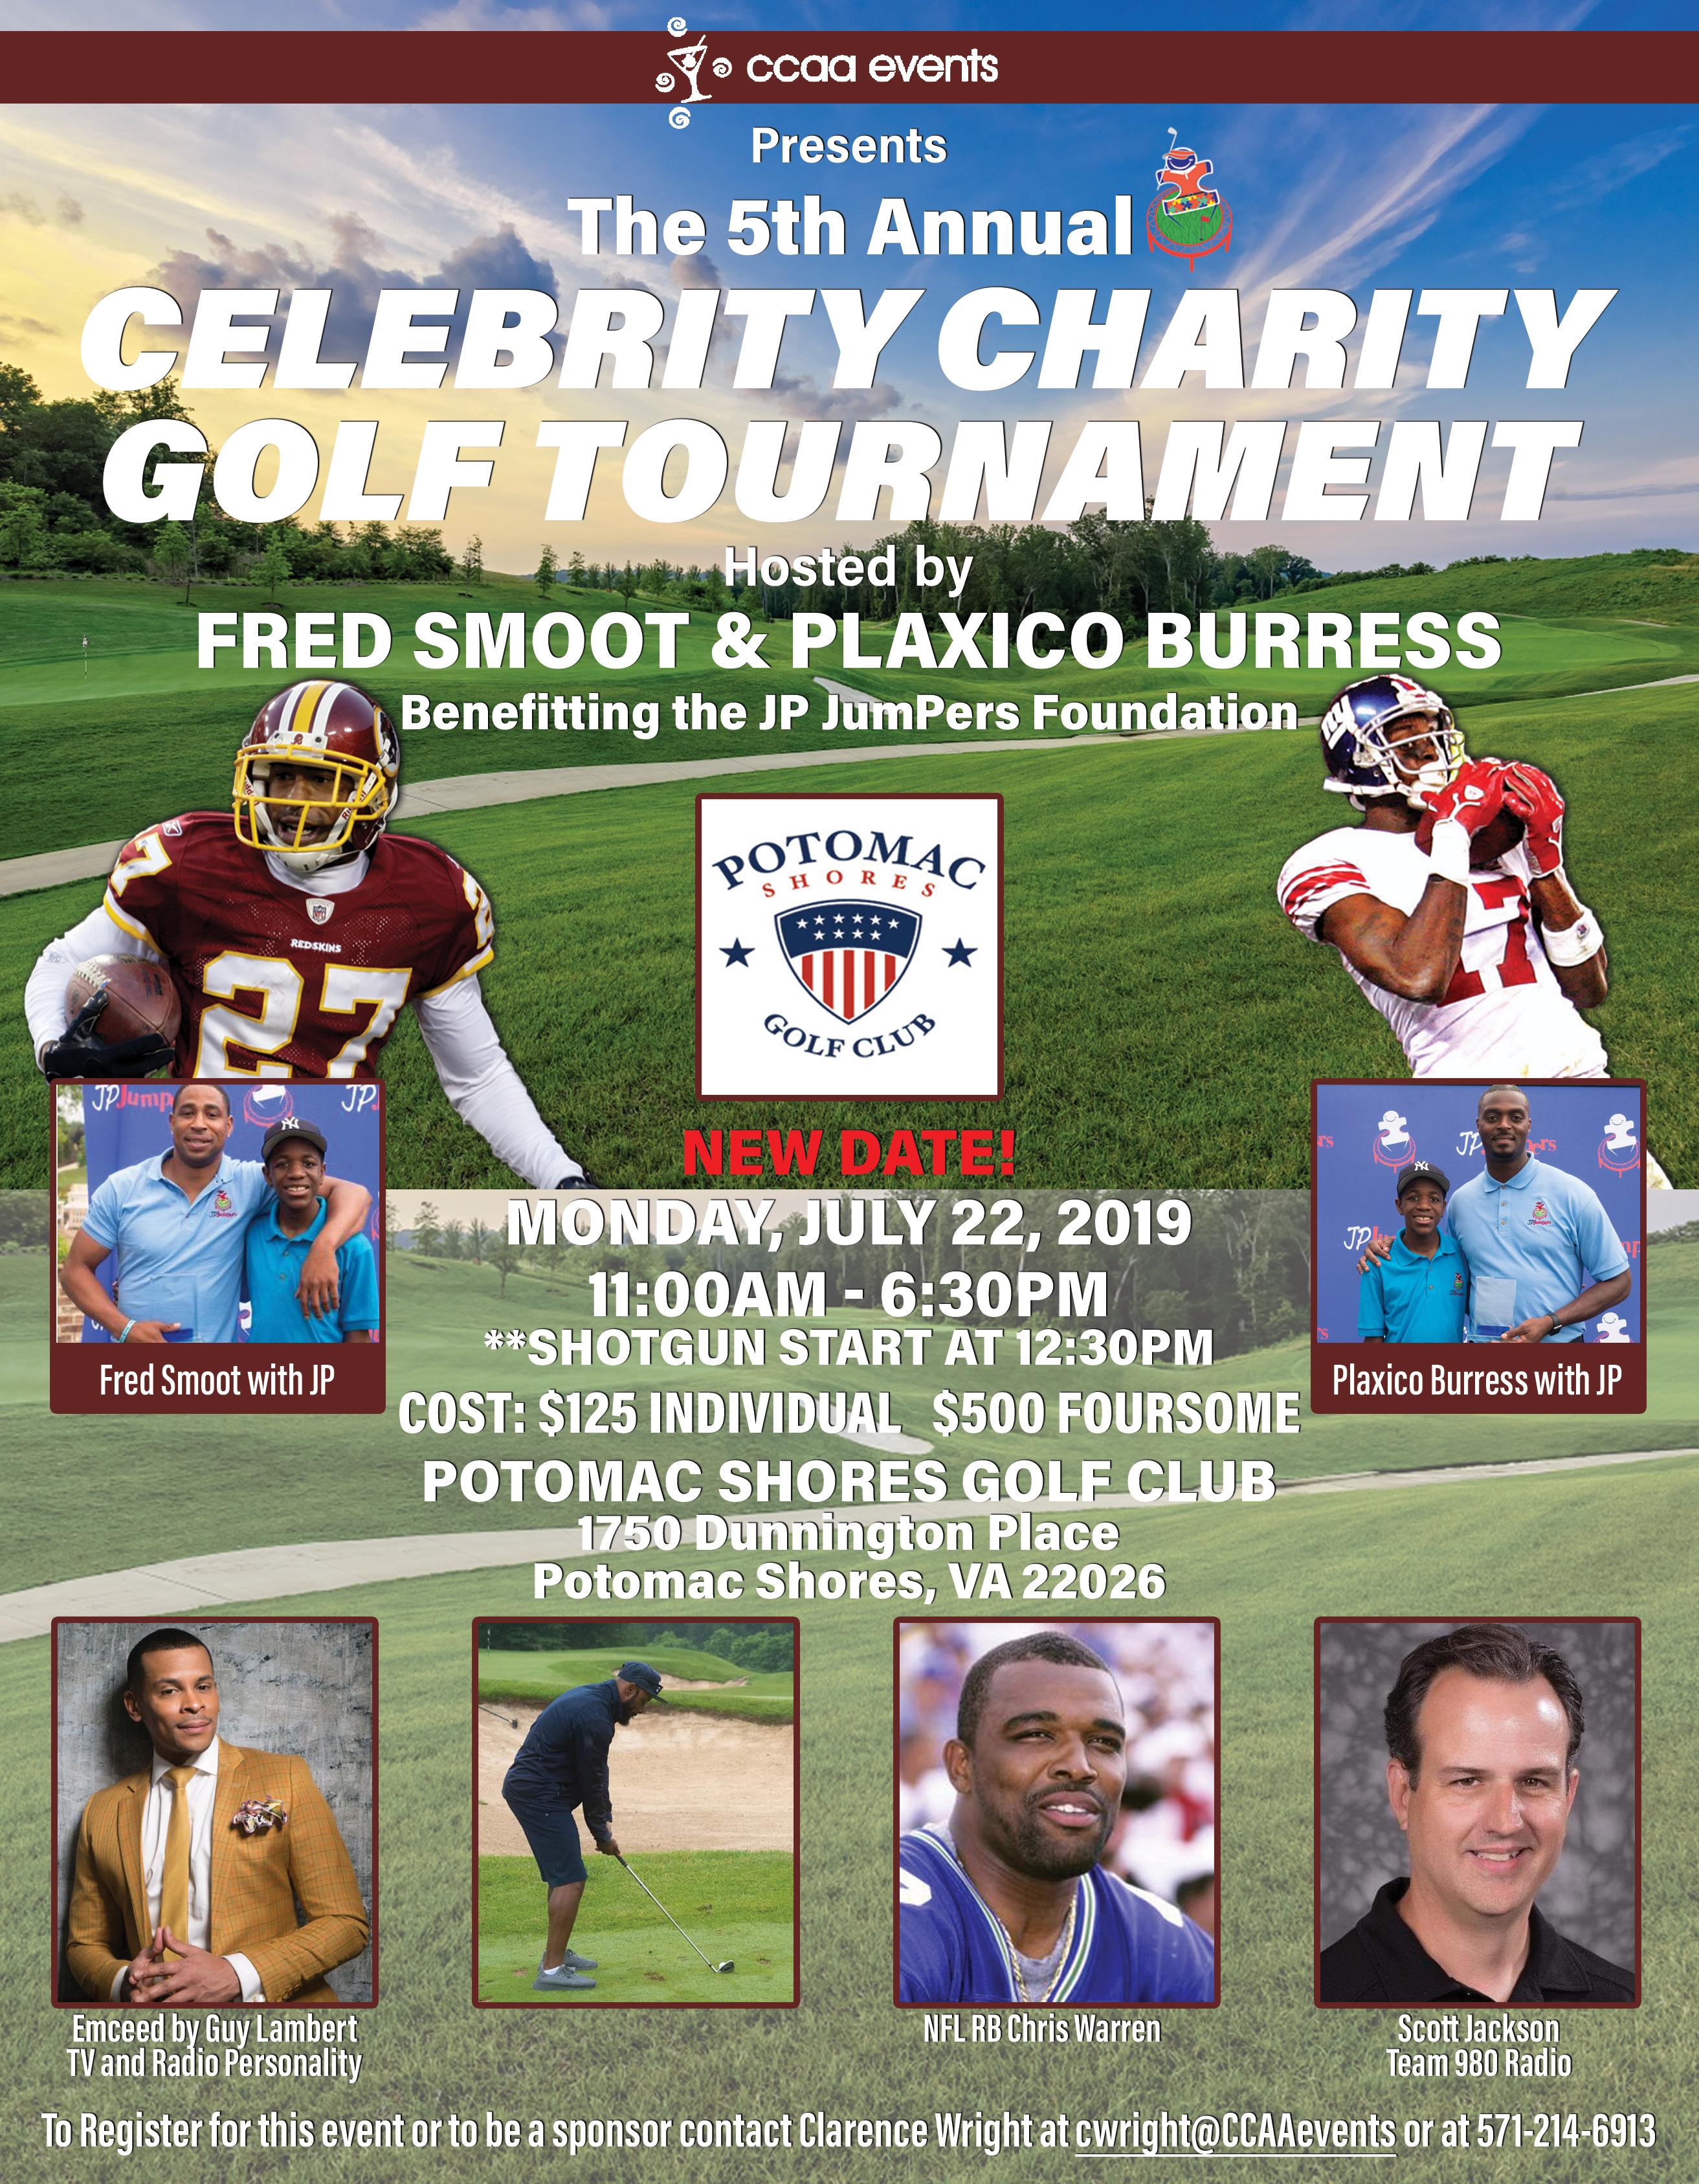 2019 Celebrity Charity Golf Tournament Hosted by NFL Fred Smoot & Plaxico Burress